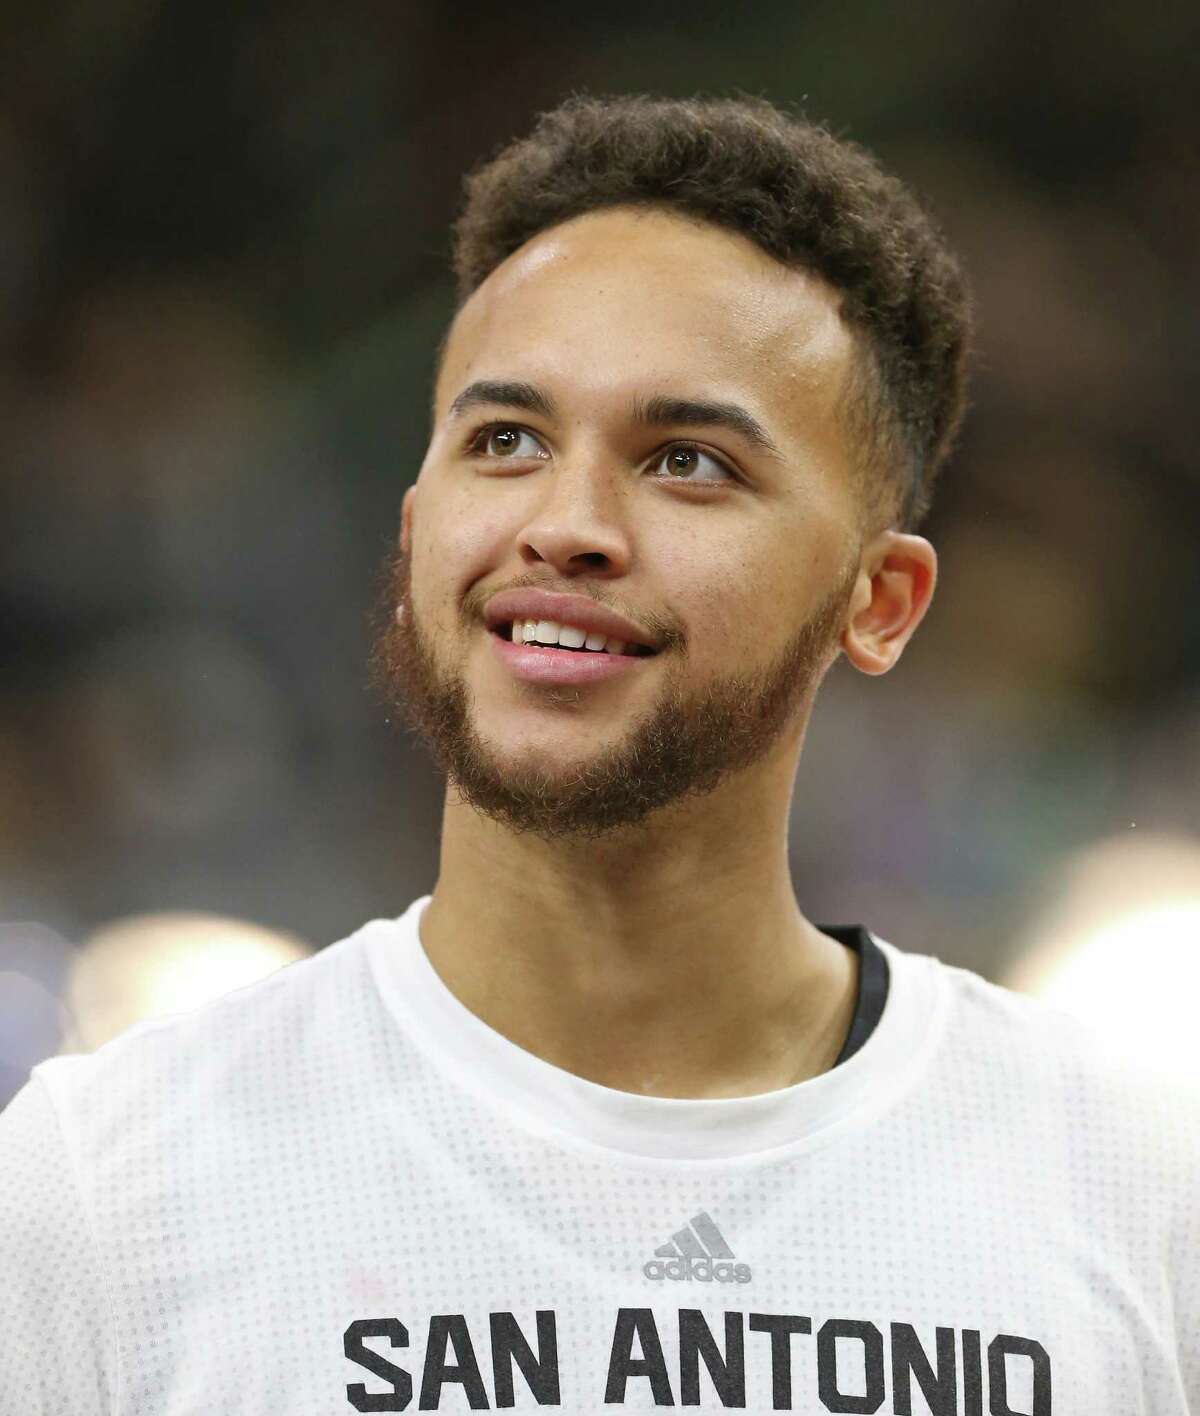 Spurs’ Kyle Anderson pauses before second half action against the Memphis Grizzlies on Nov. 21, 2015 at the AT&T Center.